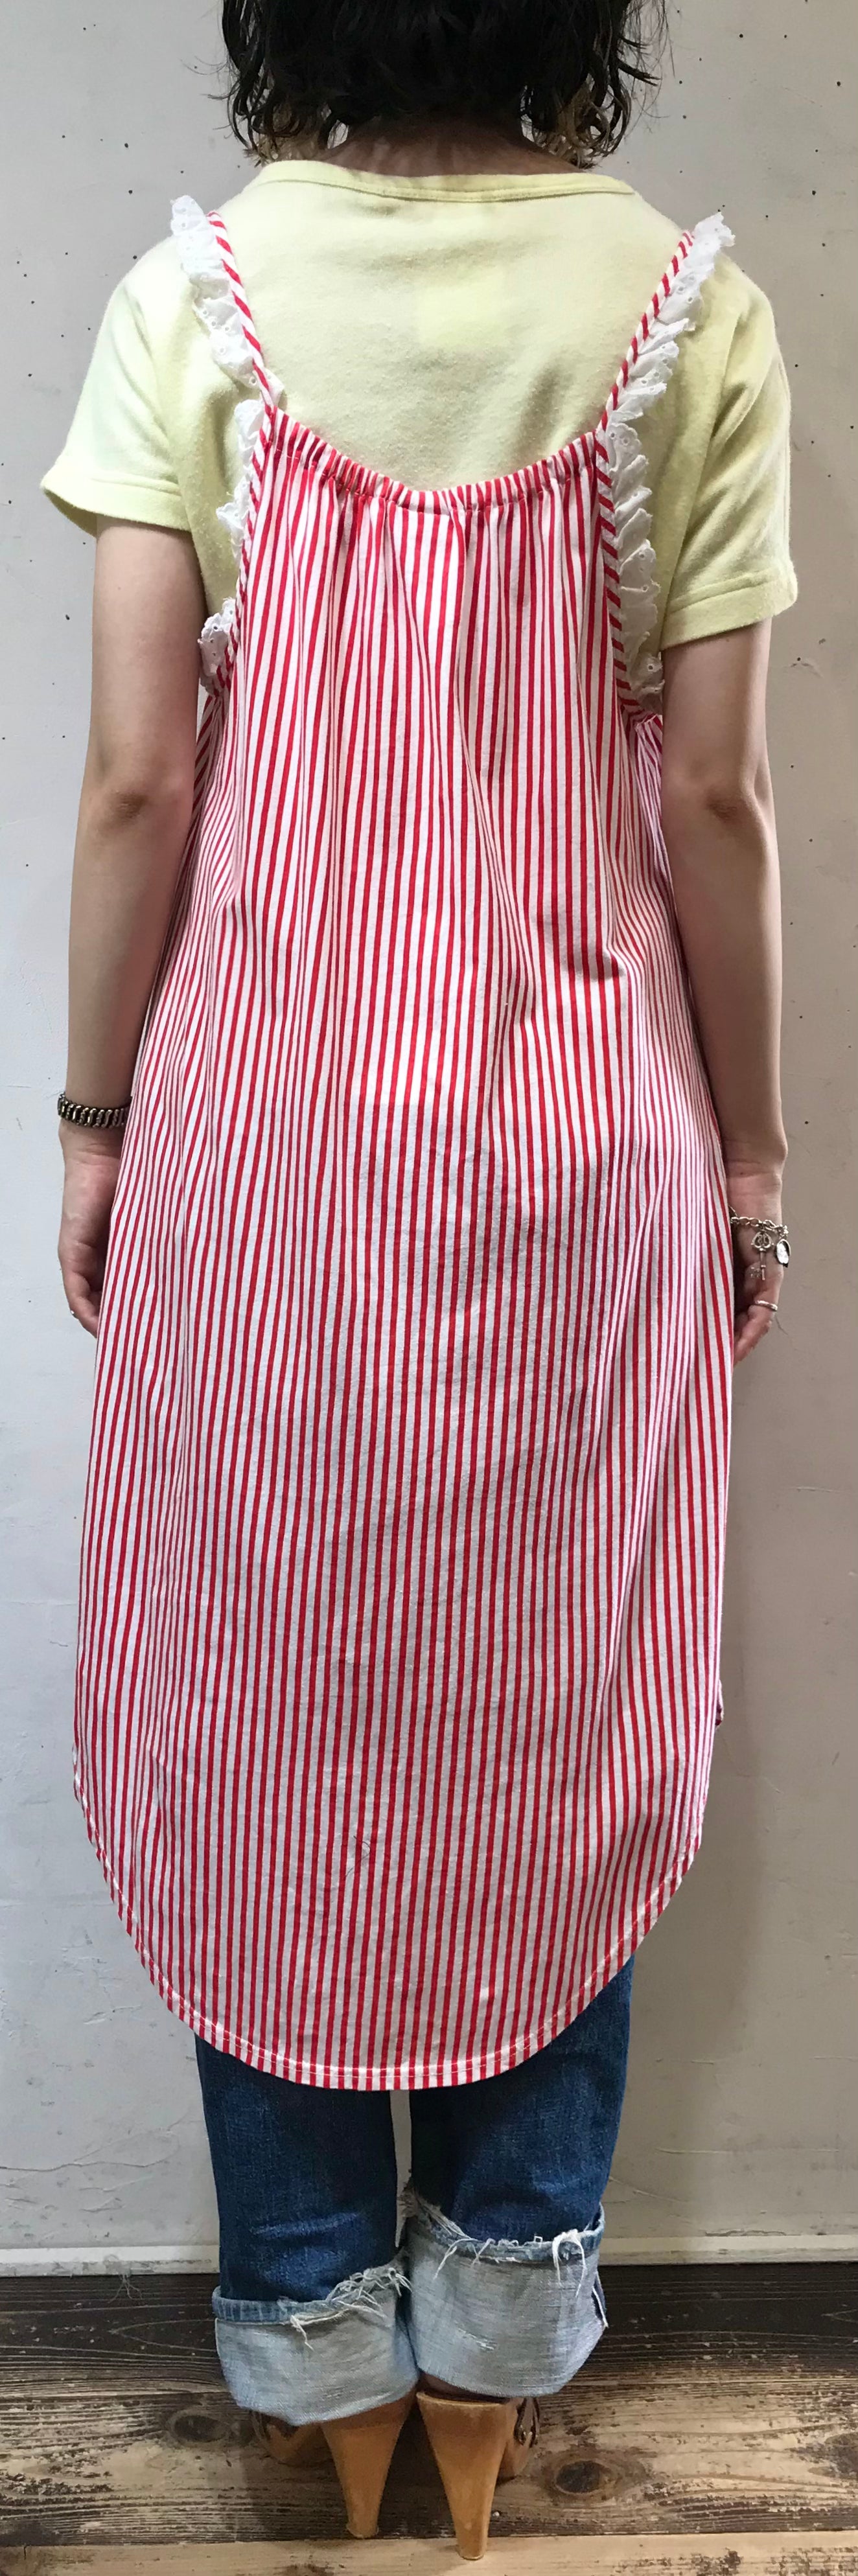 Vintage Camisole Dress MADE IN W. Germany [G24566]